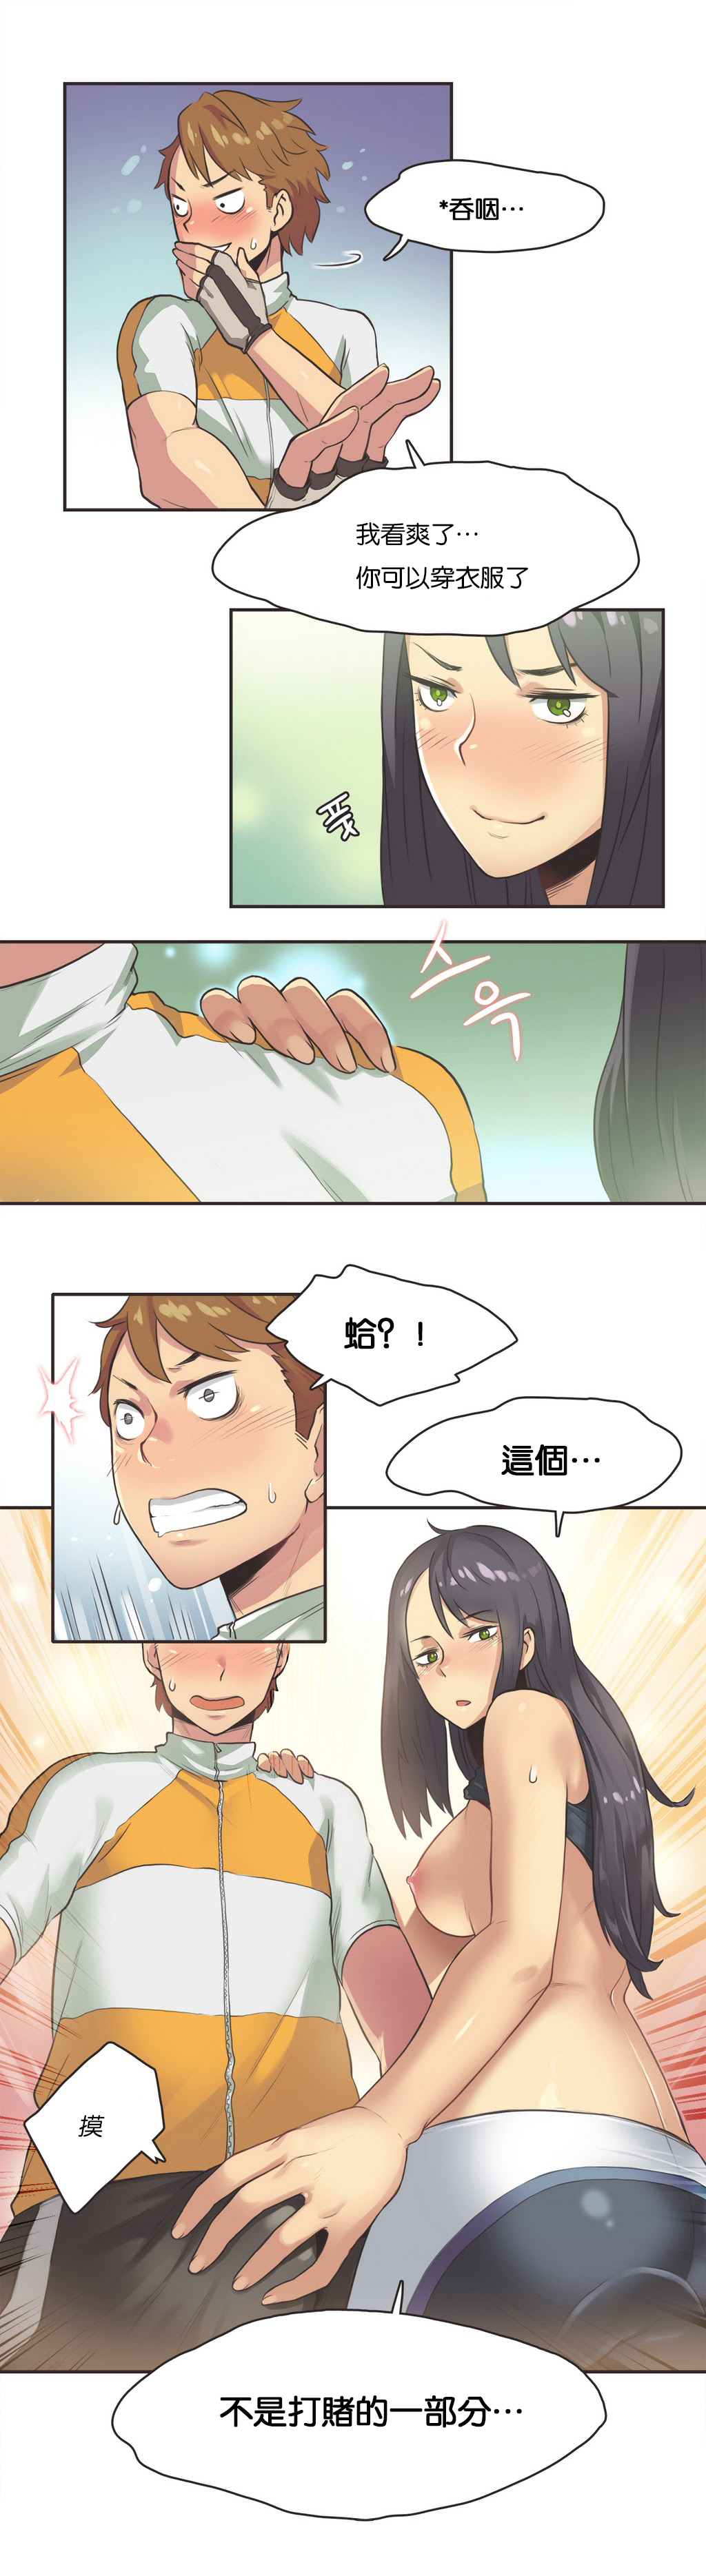 [Gamang] Sports Girl Ch.11 [Chinese] 